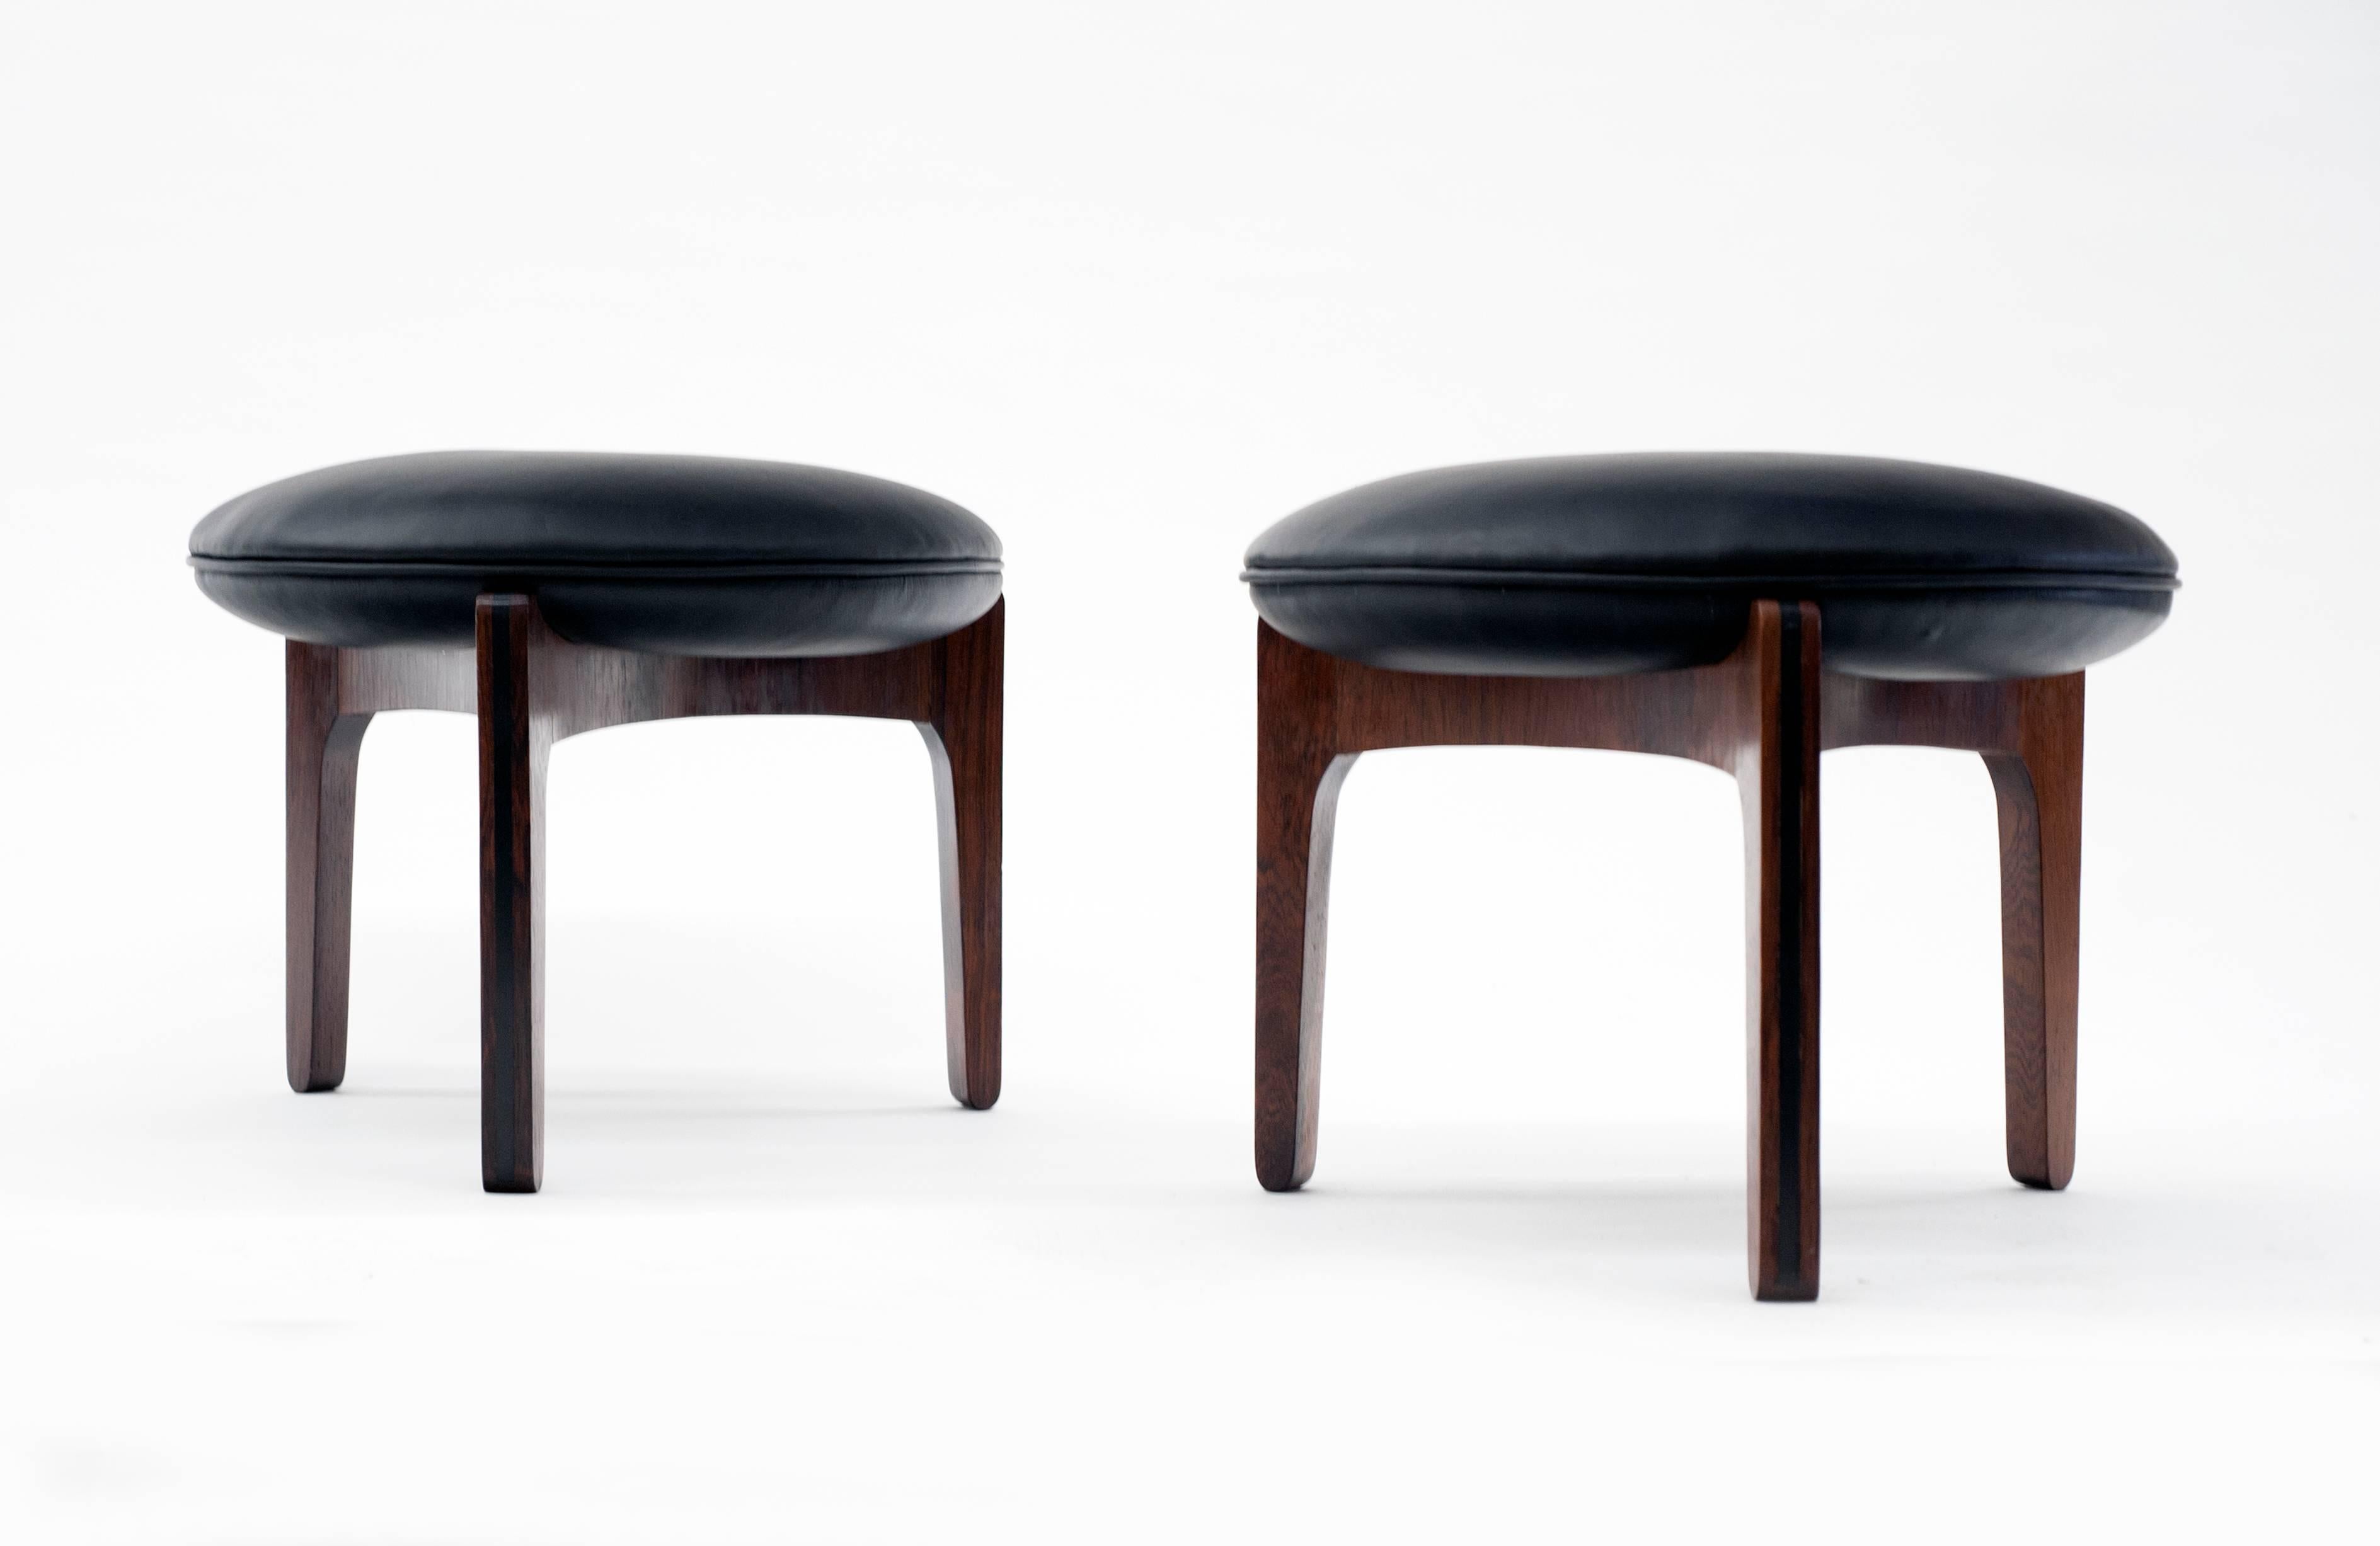 Appealing pair of stools by Danish designer Sven Ellekaer. Stools are quality made of Brazilian rosewood with ebony details. They have been professionally reupholstered in soft Italian leather. Condition is excellent.